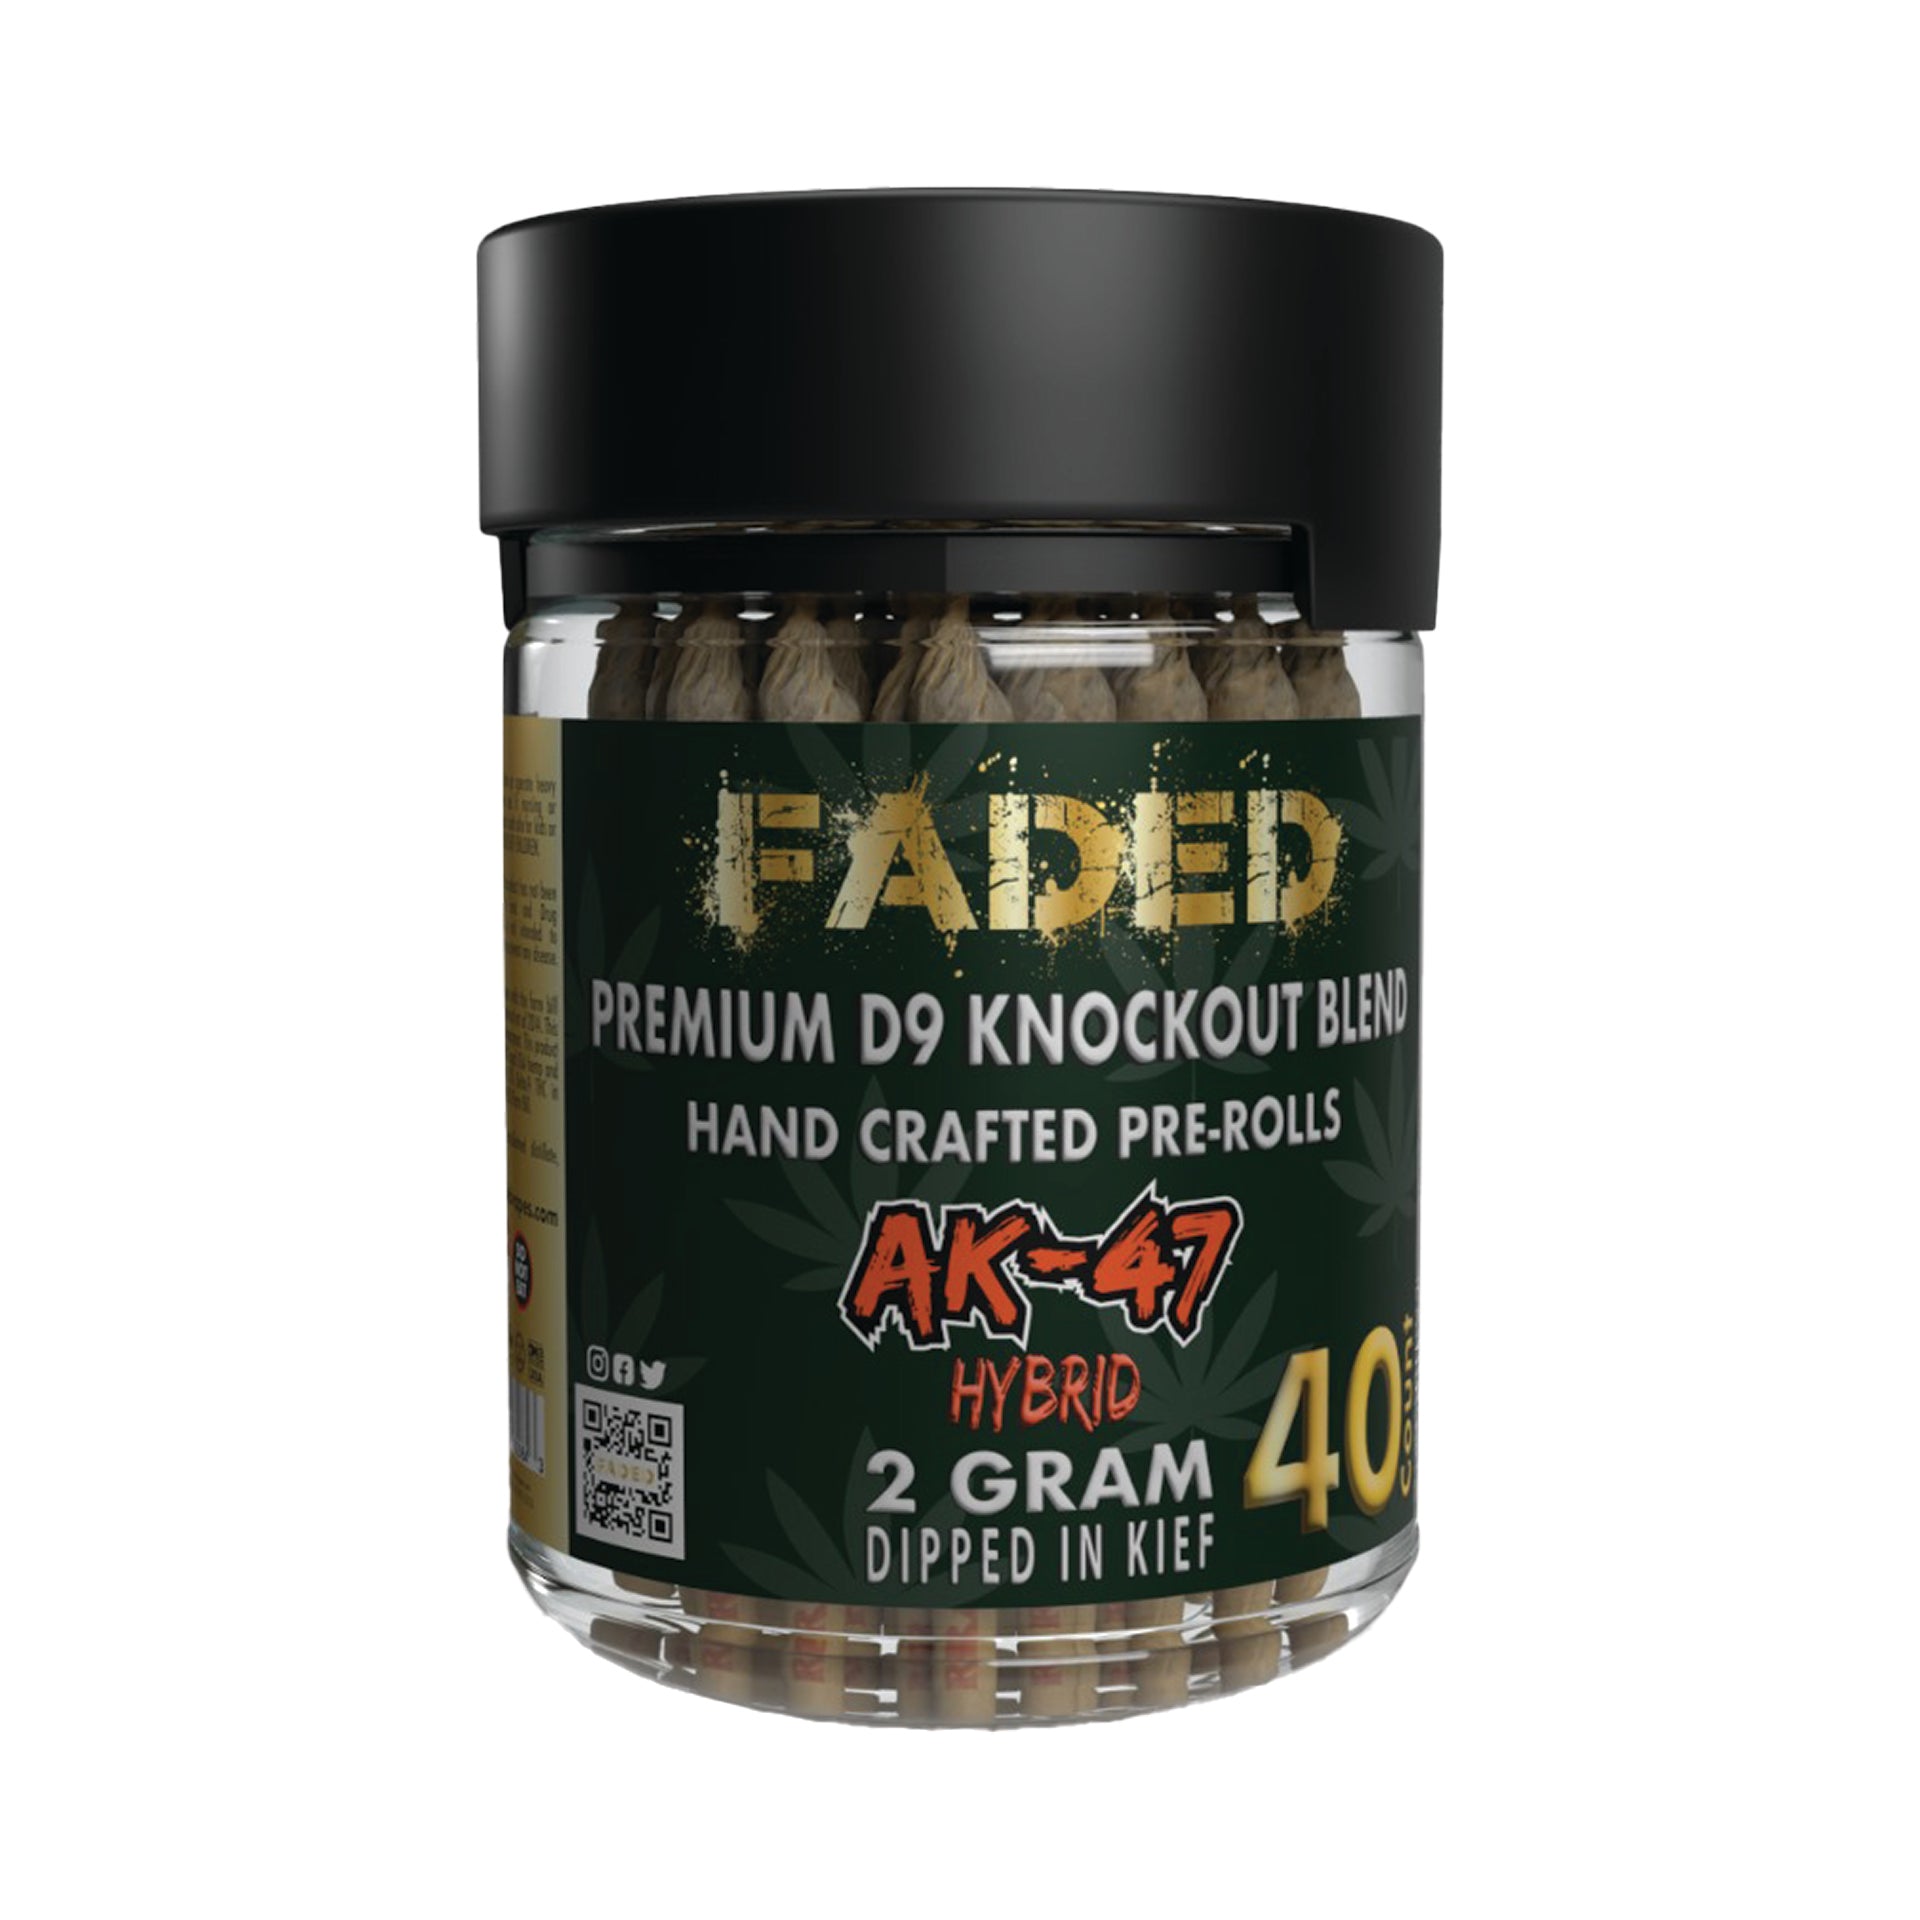 FADED PREMIUM DELTA-9 KNOCKOUT BLEND AK-47 HAND CRAFTED PRE-ROLL 2GR 40CT JAR